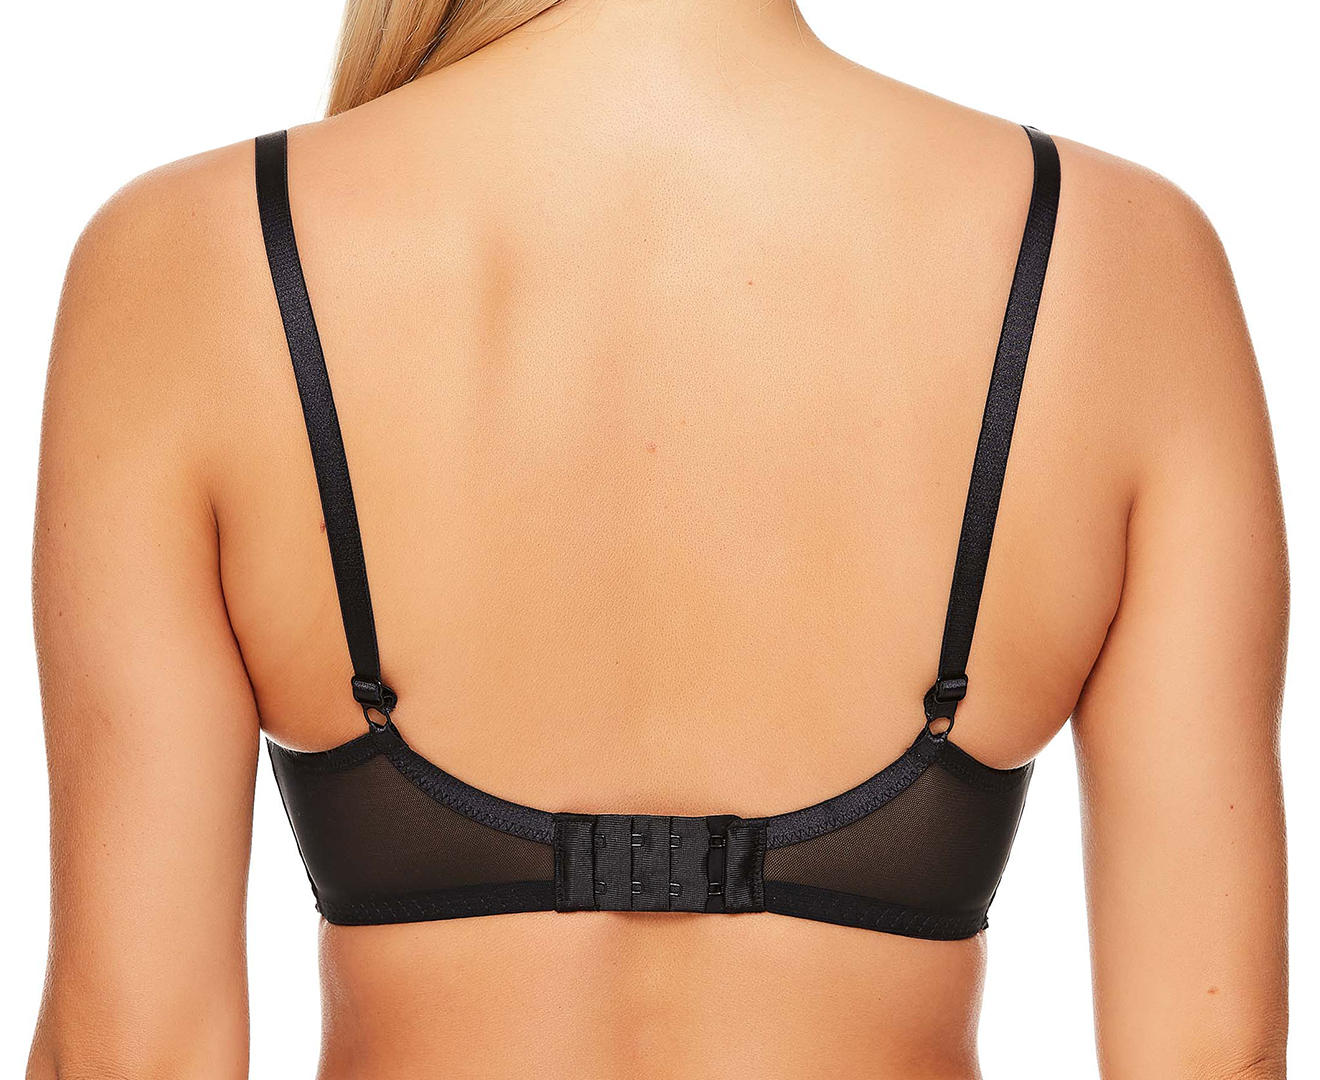 Me. By Bendon Women's Only Me Underwire Bra - Black/Tuscany